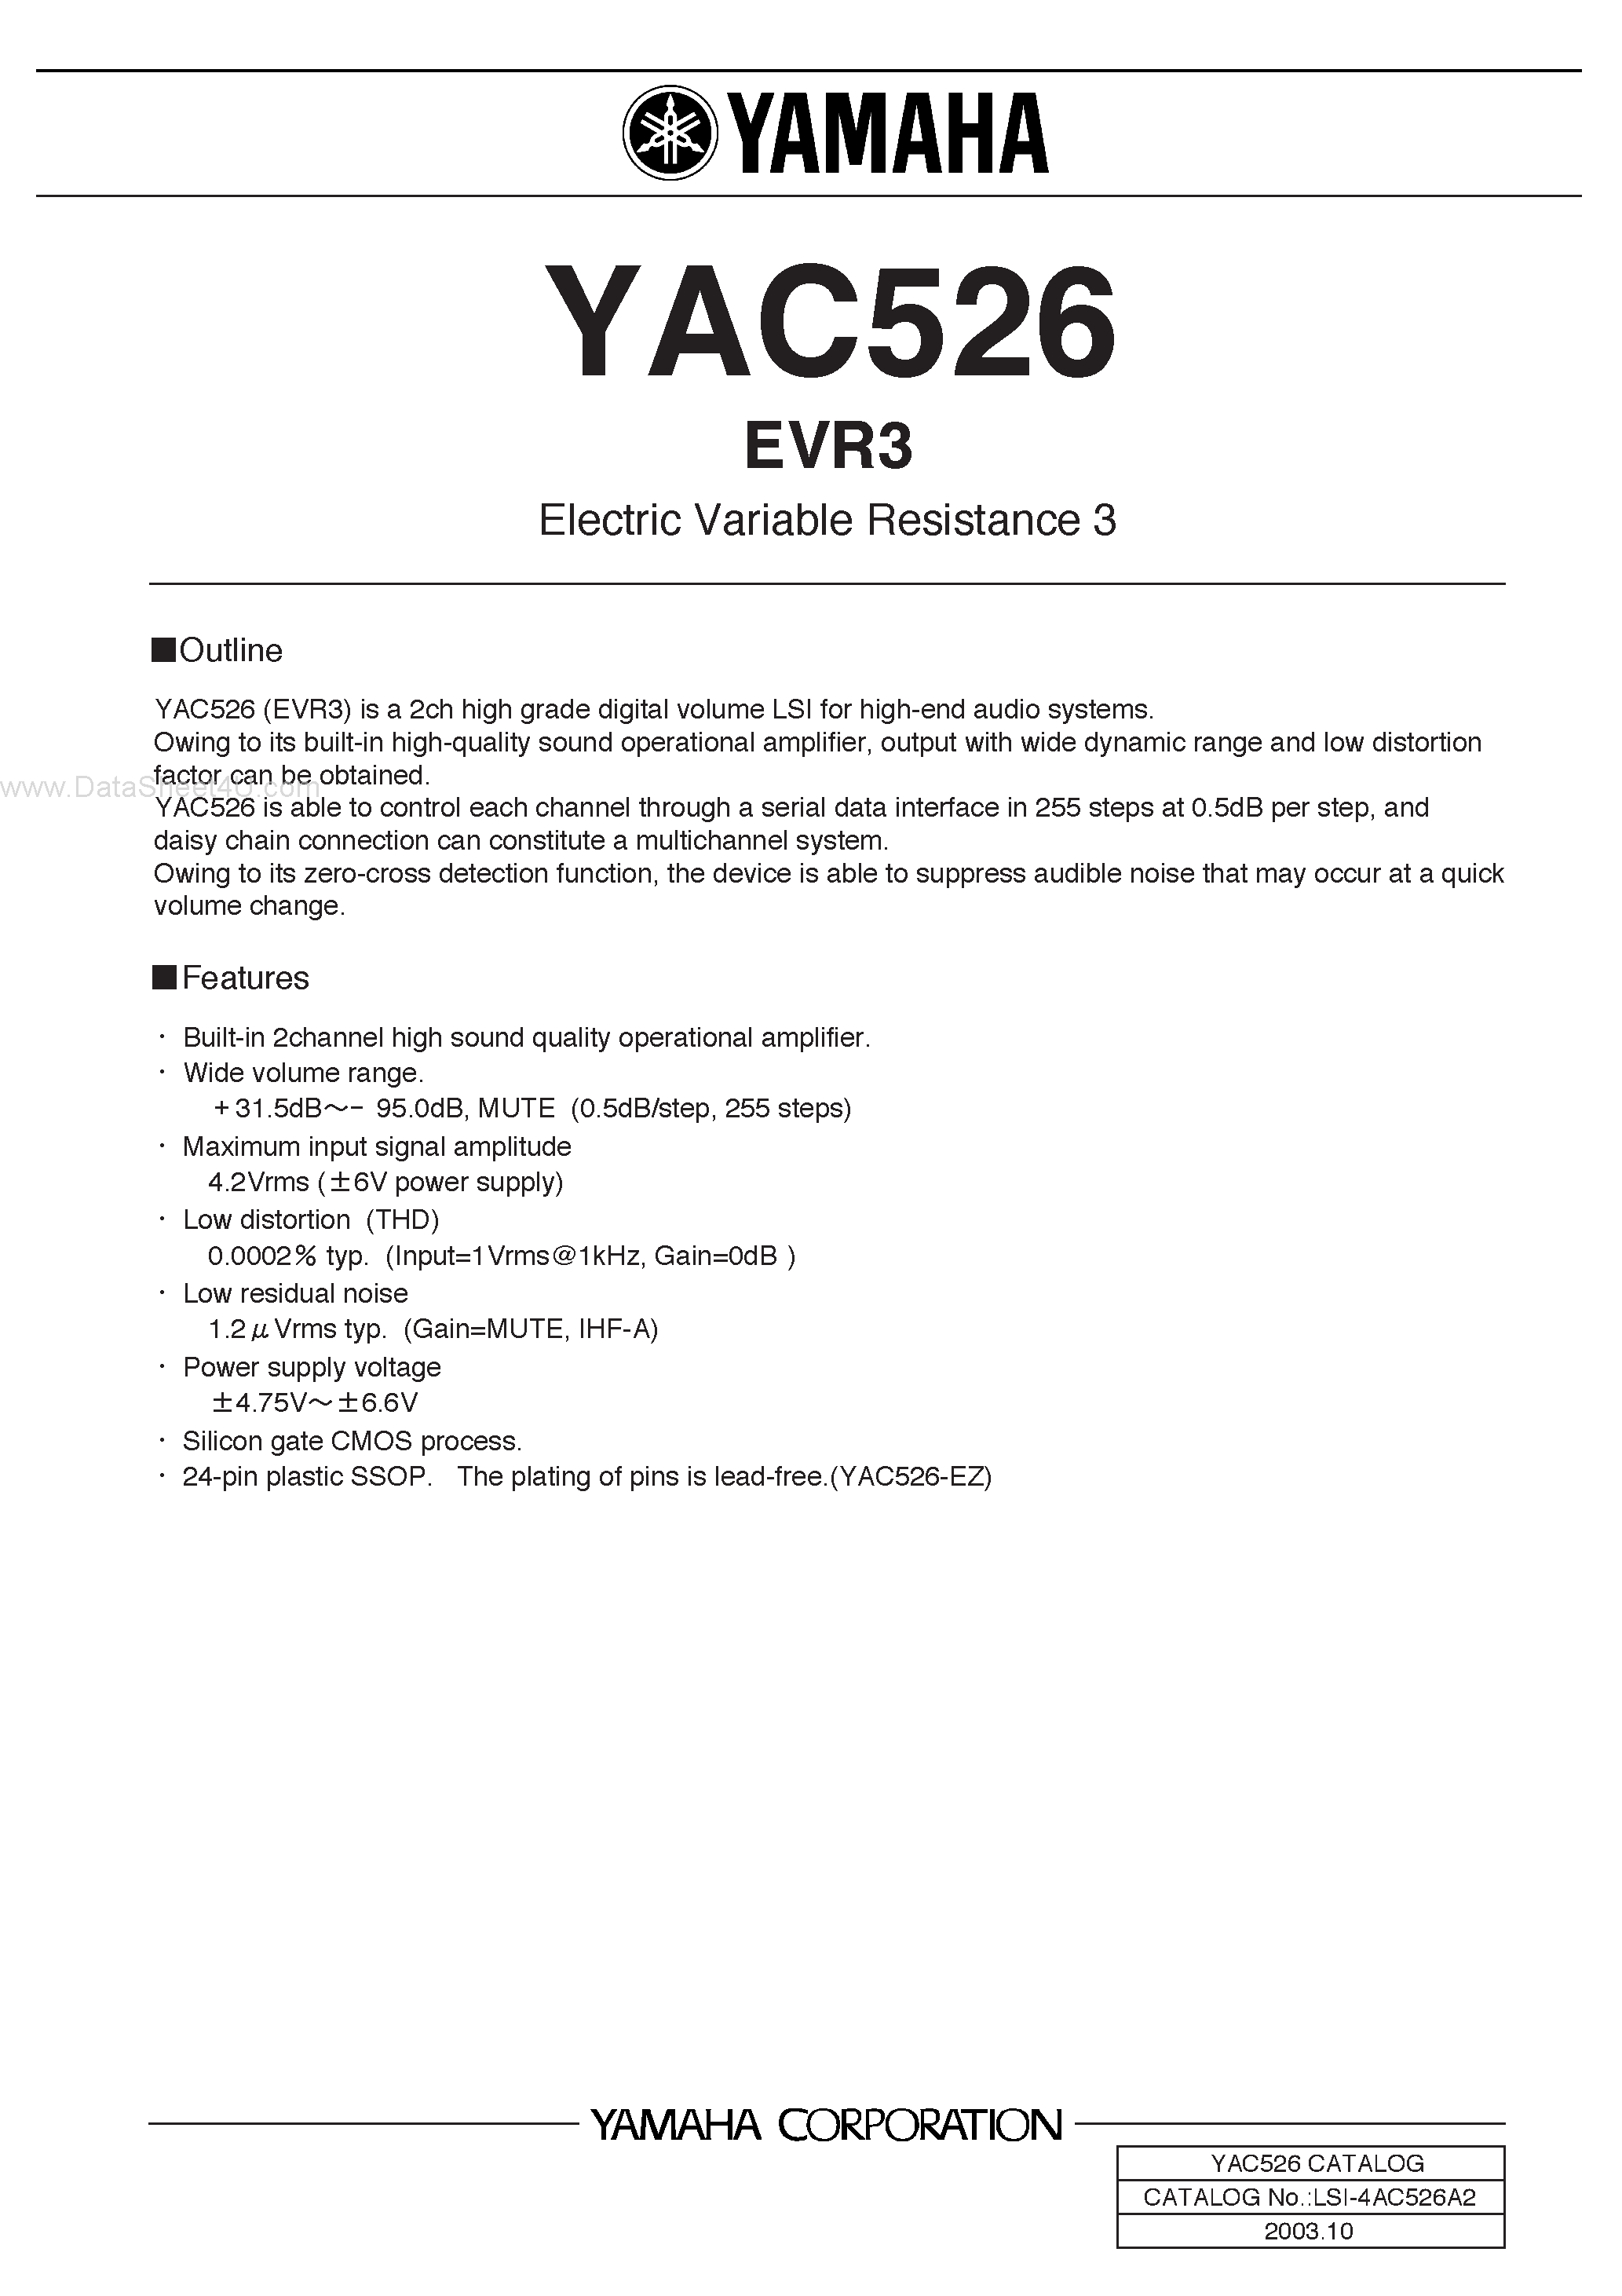 Datasheet YAC526 - Electric Variable Resistance 3 page 1